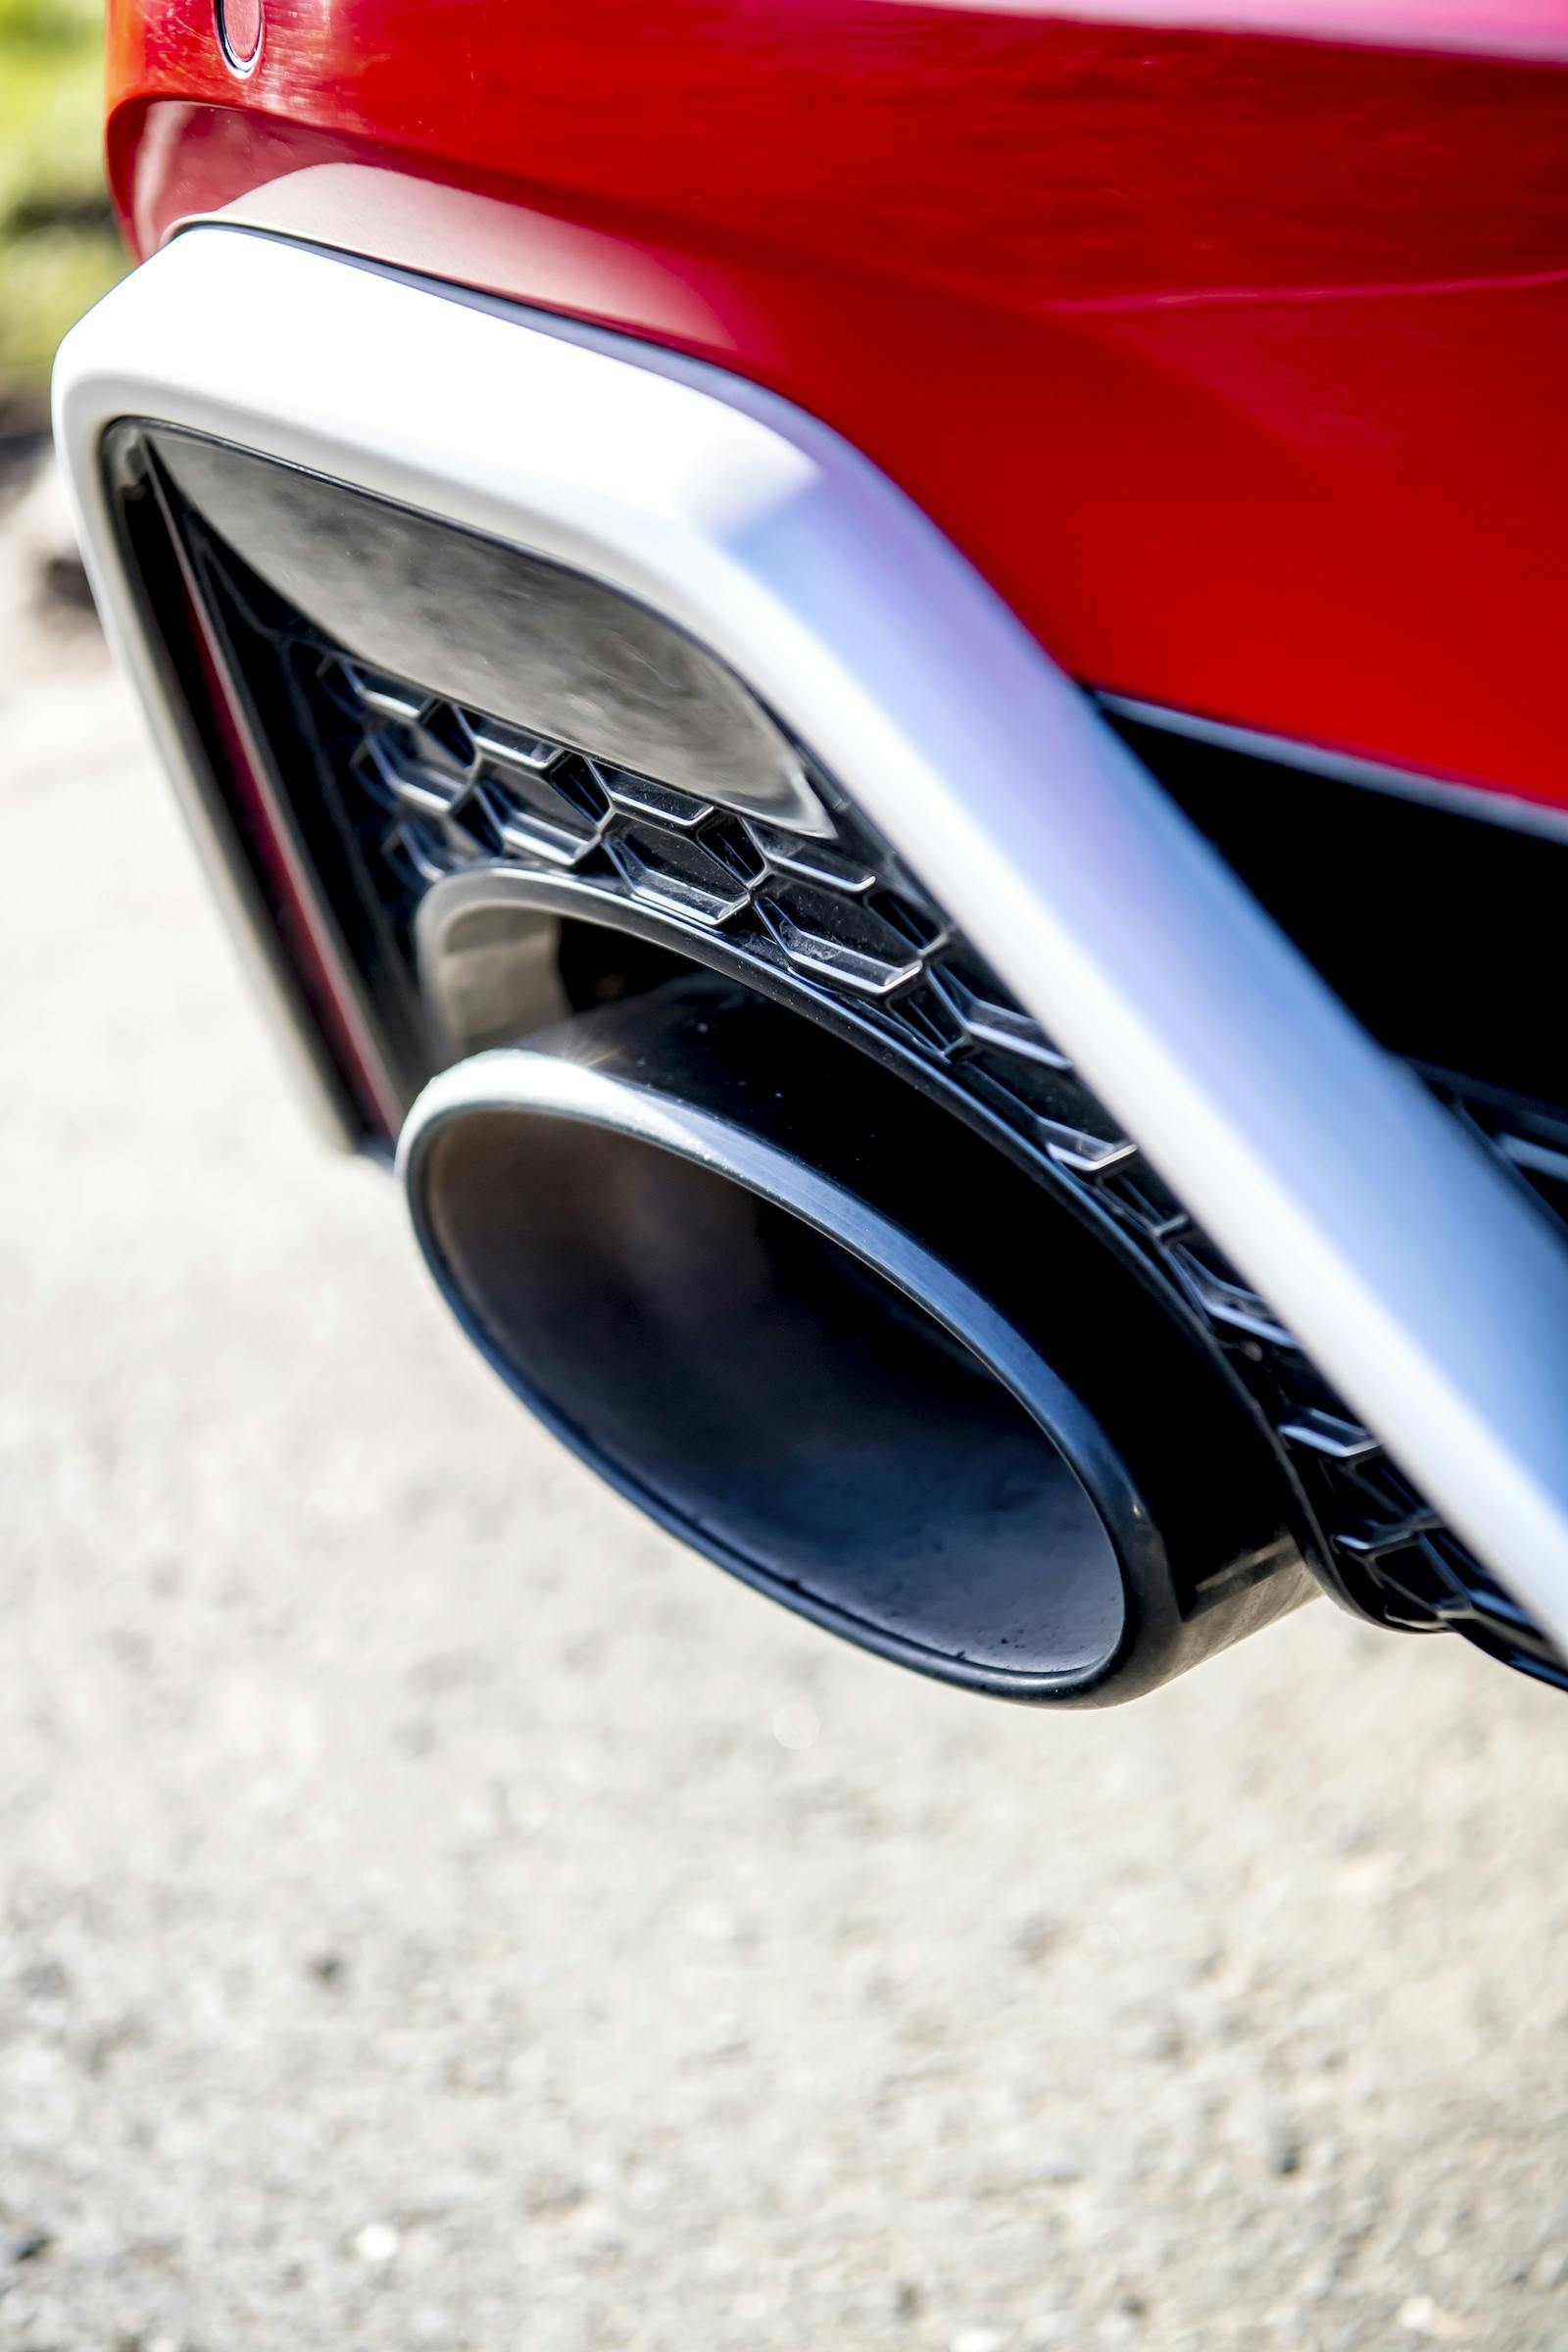 Audi RS6 rear exhaust tip detail